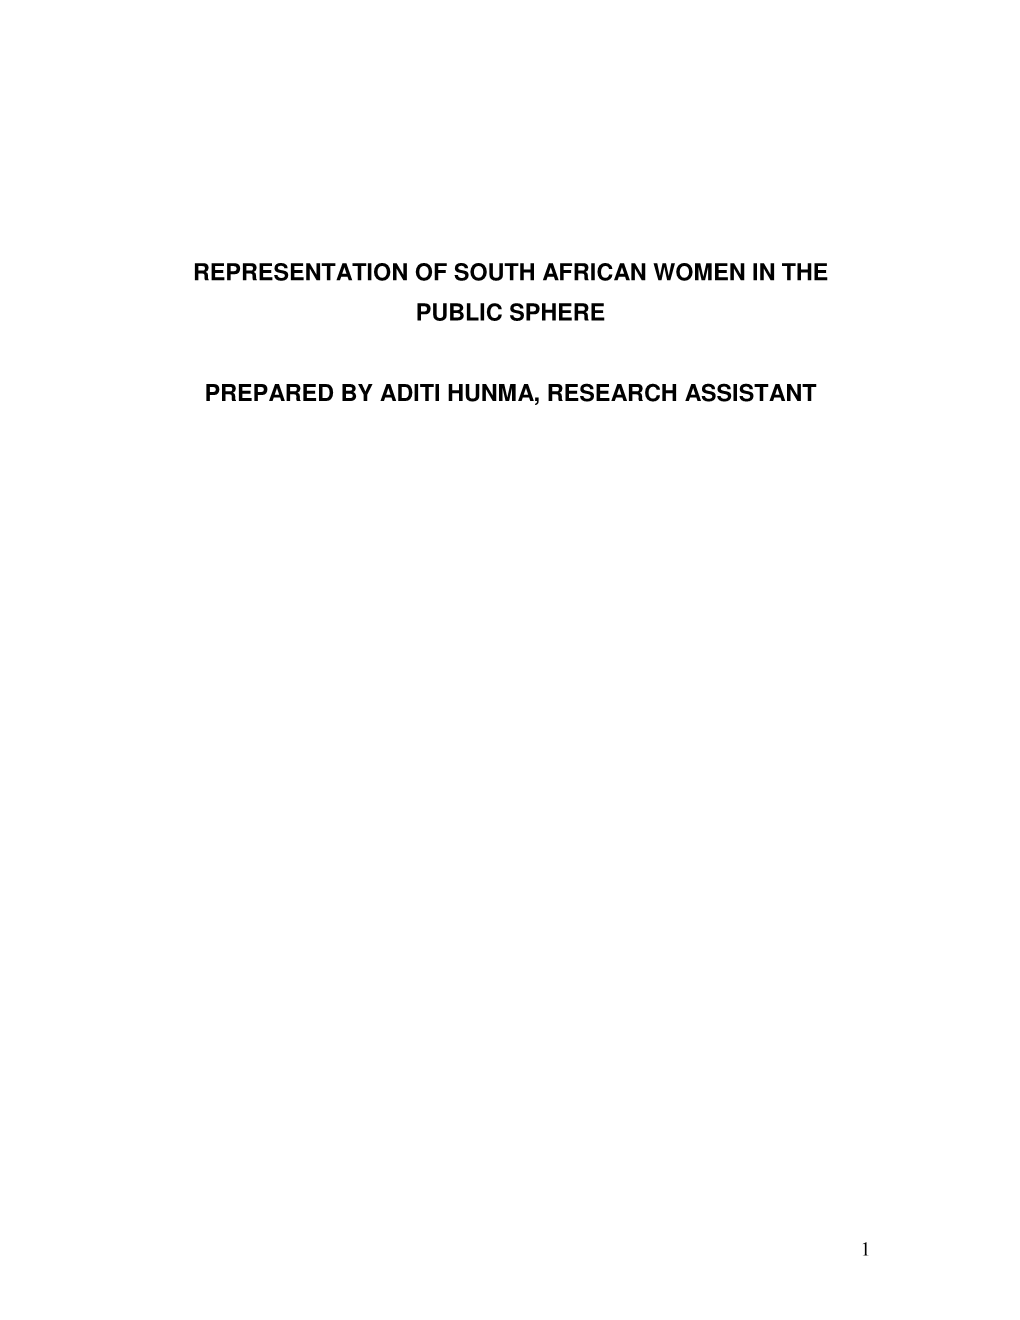 Representation of South African Women in the Public Sphere